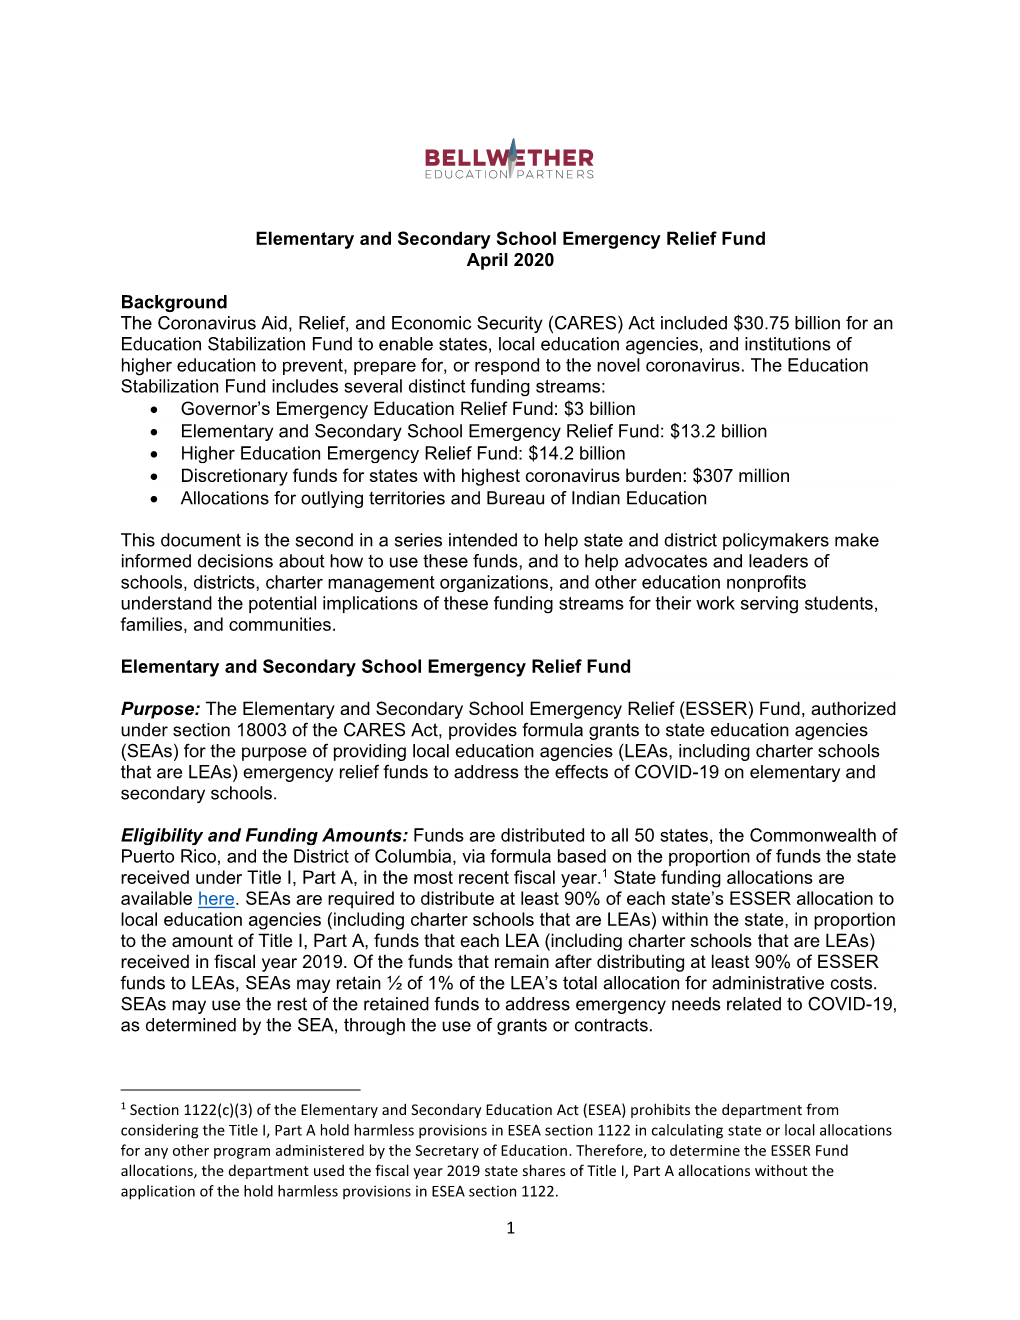 Elementary and Secondary School Emergency Relief Fund April 2020